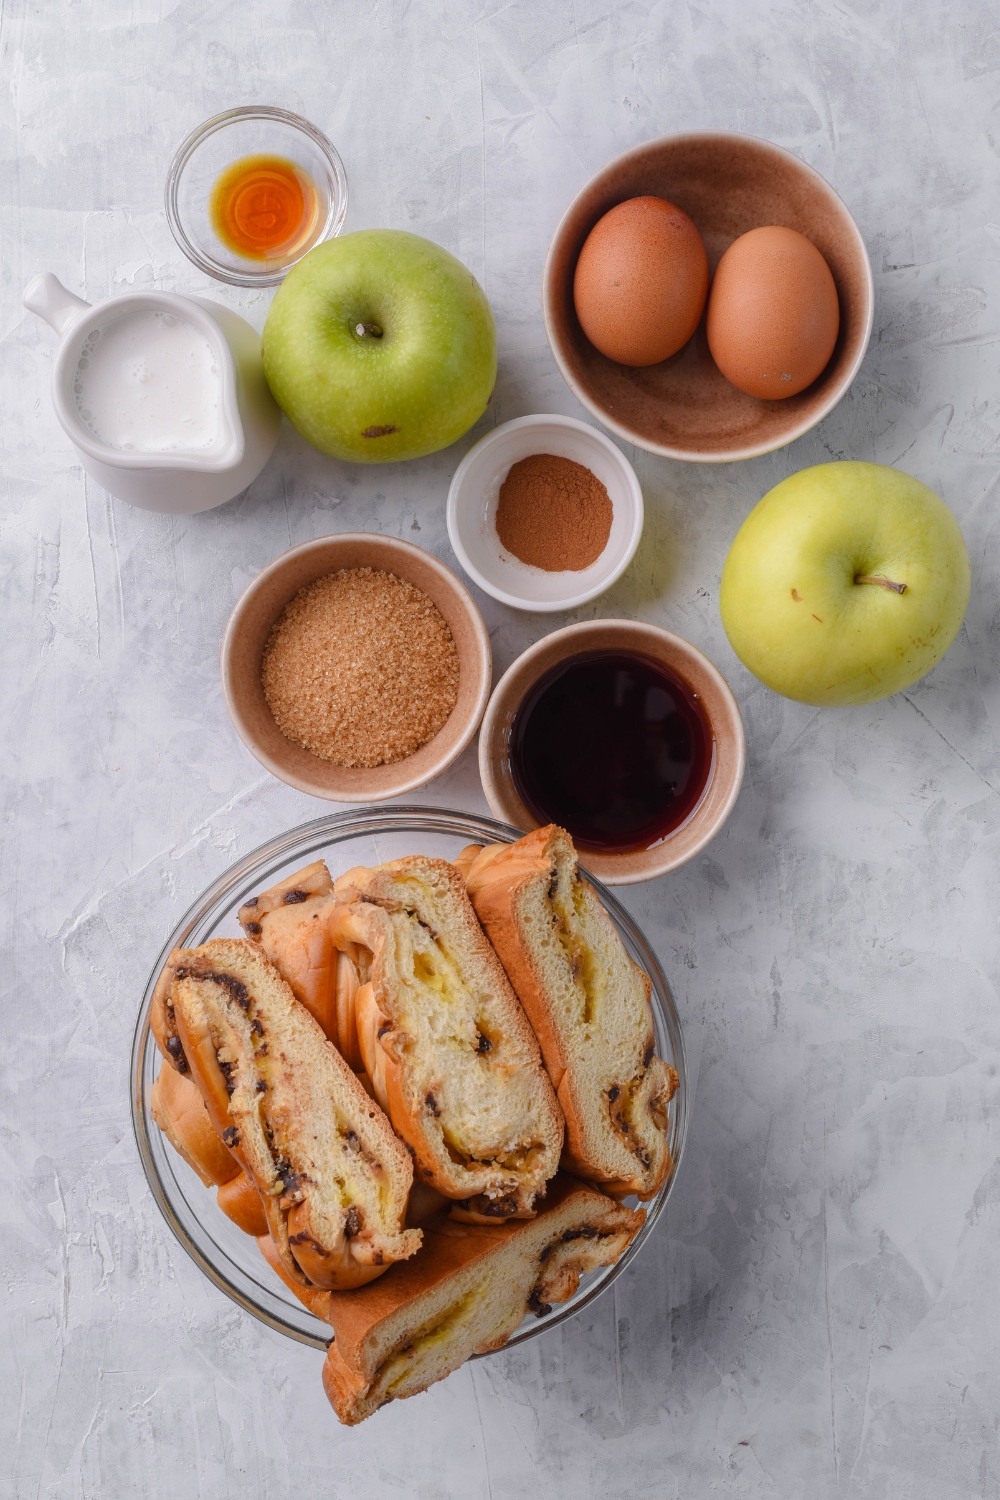 An assortment of ingredients including bowls of bread slices, two eggs, brown sugar, cinnamon, vanilla extract, maple syrup, a pitcher of cream, and two green apples on a grey counter.